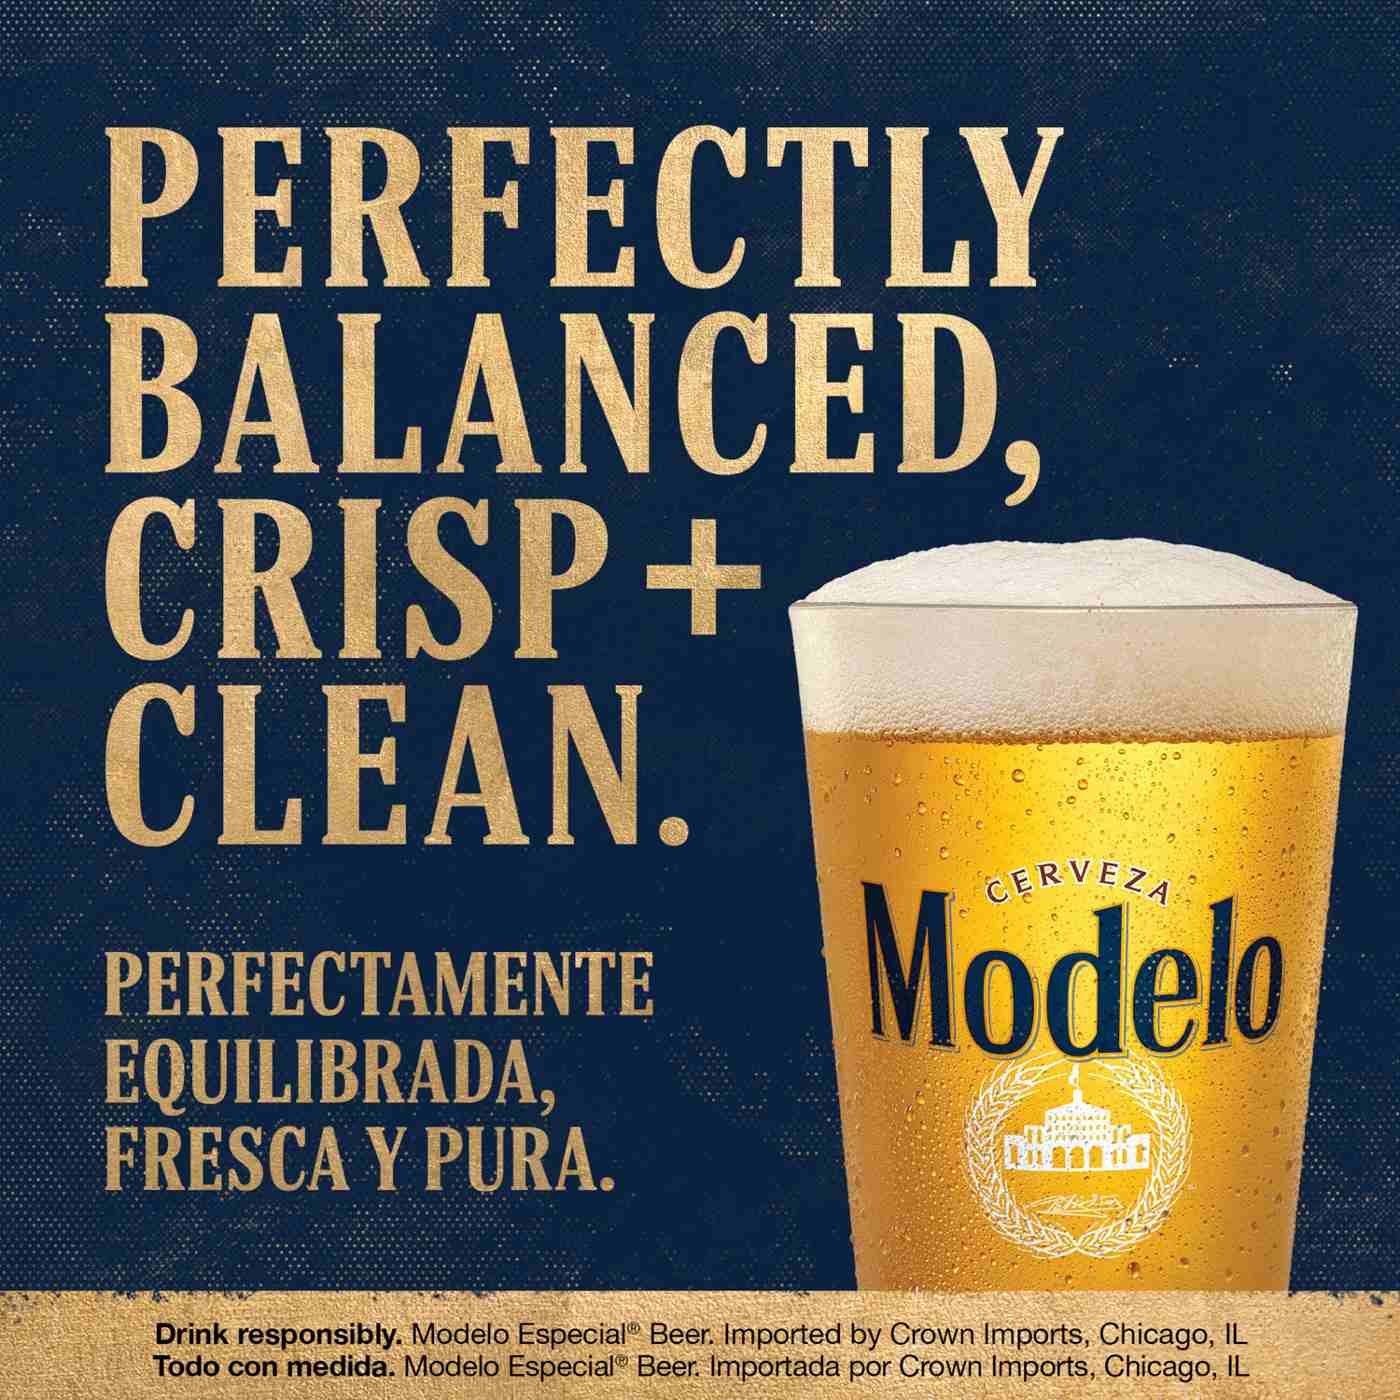 Modelo Especial Mexican Lager Import Beer 12 oz Cans, 6 pk; image 11 of 11